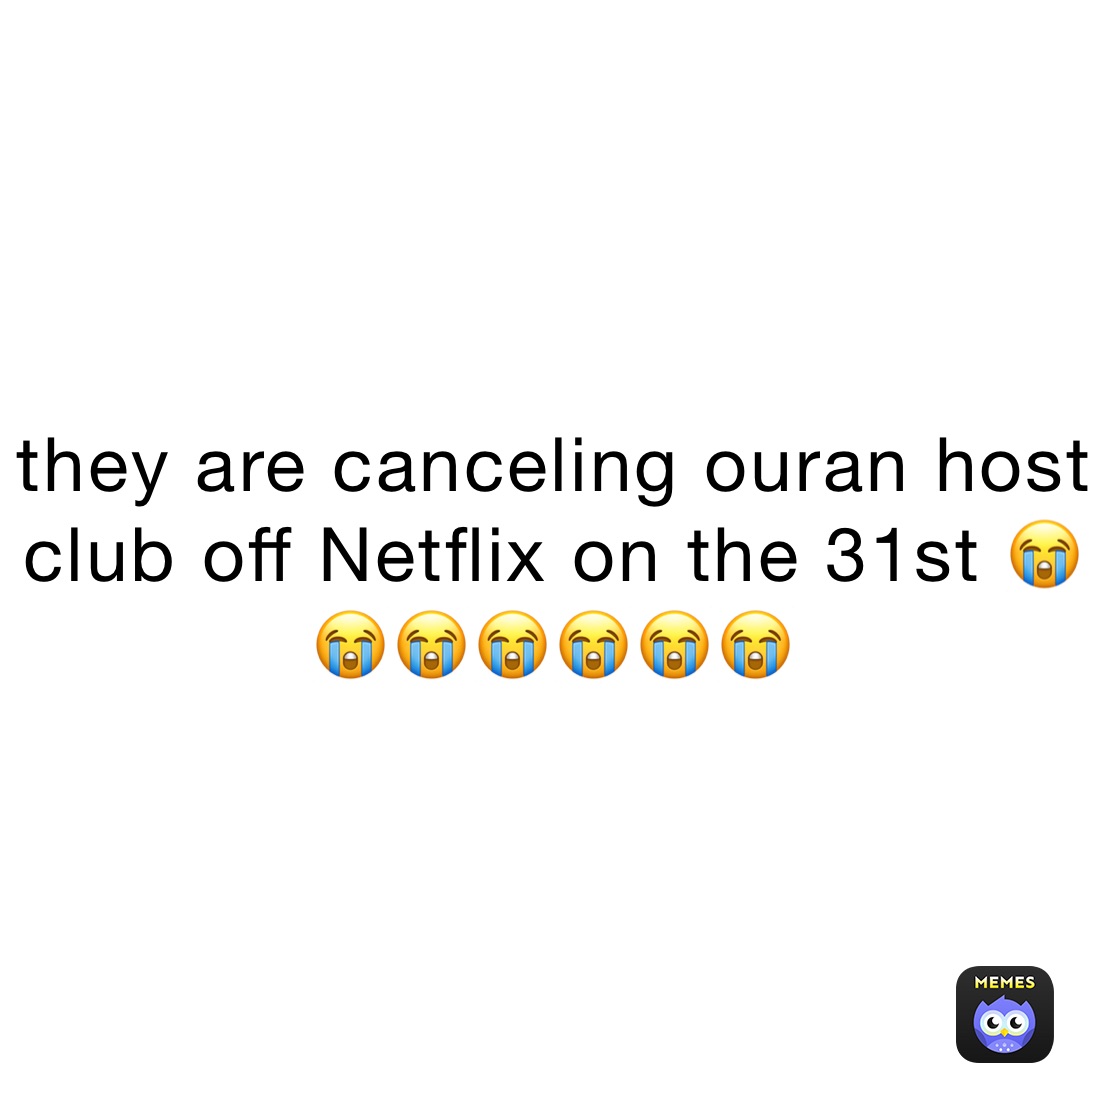 they are canceling ouran host club off Netflix on the 31st 😭😭😭😭😭😭😭